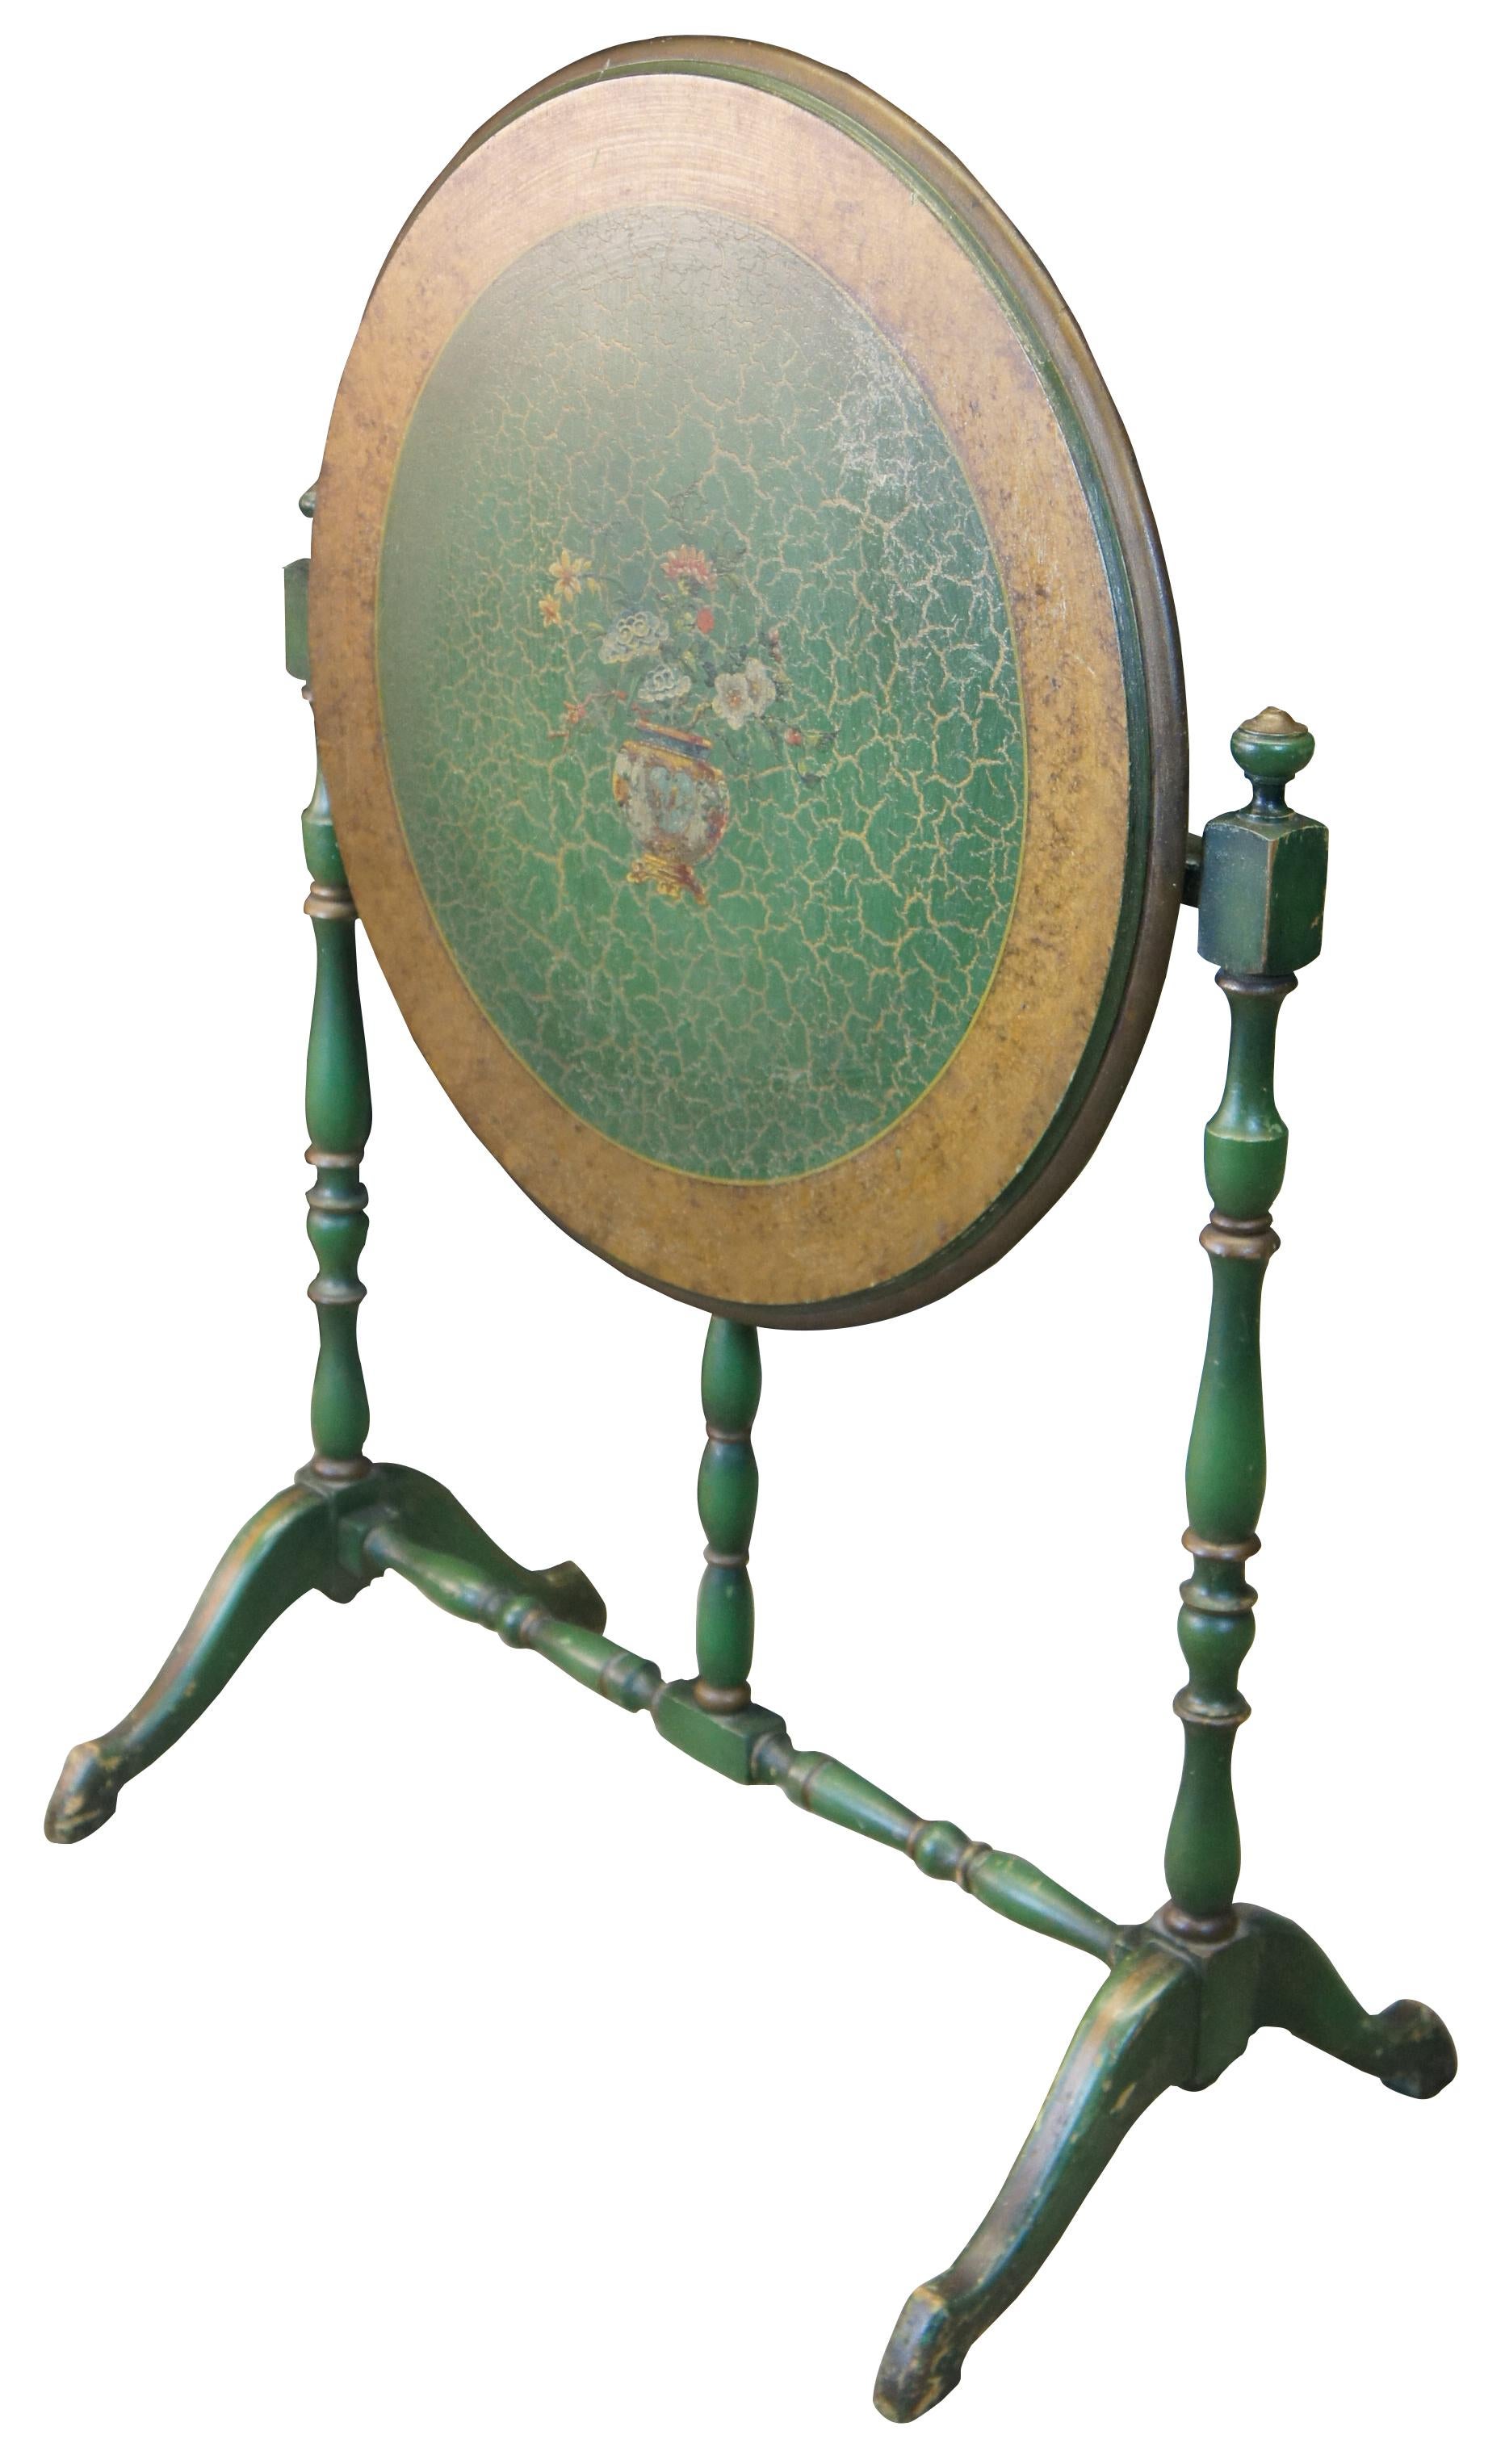 Early 20th century William & Mary style side/ tea table. Features turned supports system support system with trestle base supporting a round tilt top. Finished in green and gold with painted floral vase motif along the center.

Measures: 27